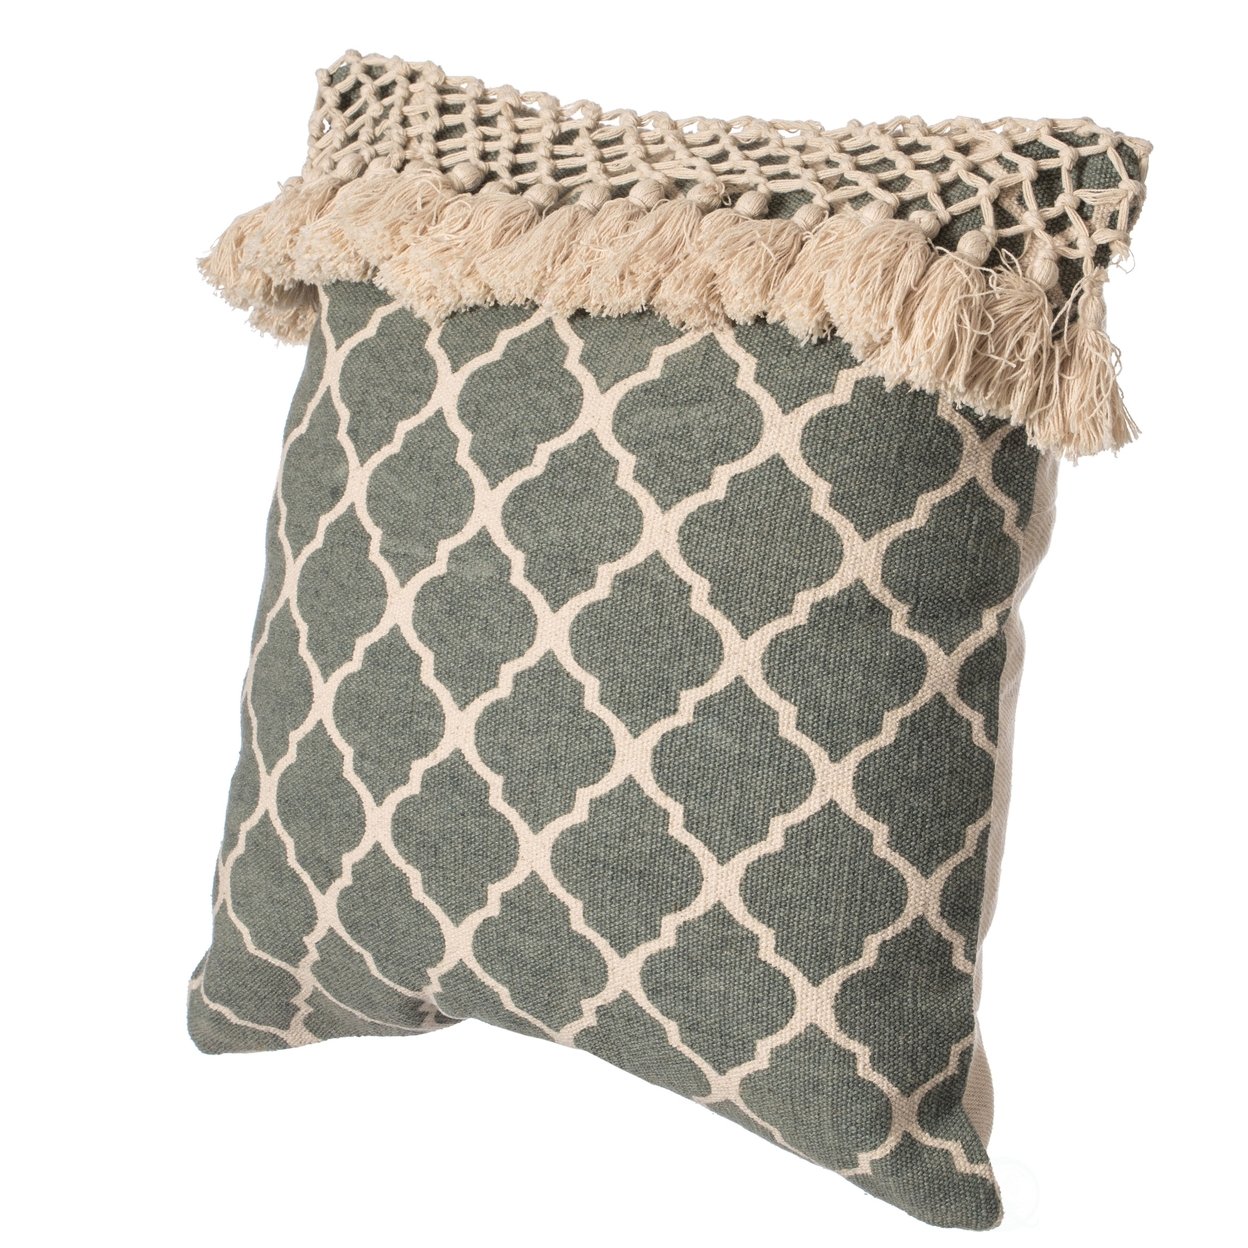 16 Handwoven Cotton Throw Pillow Cover With Ogee Pattern And Tasseled Top - Green